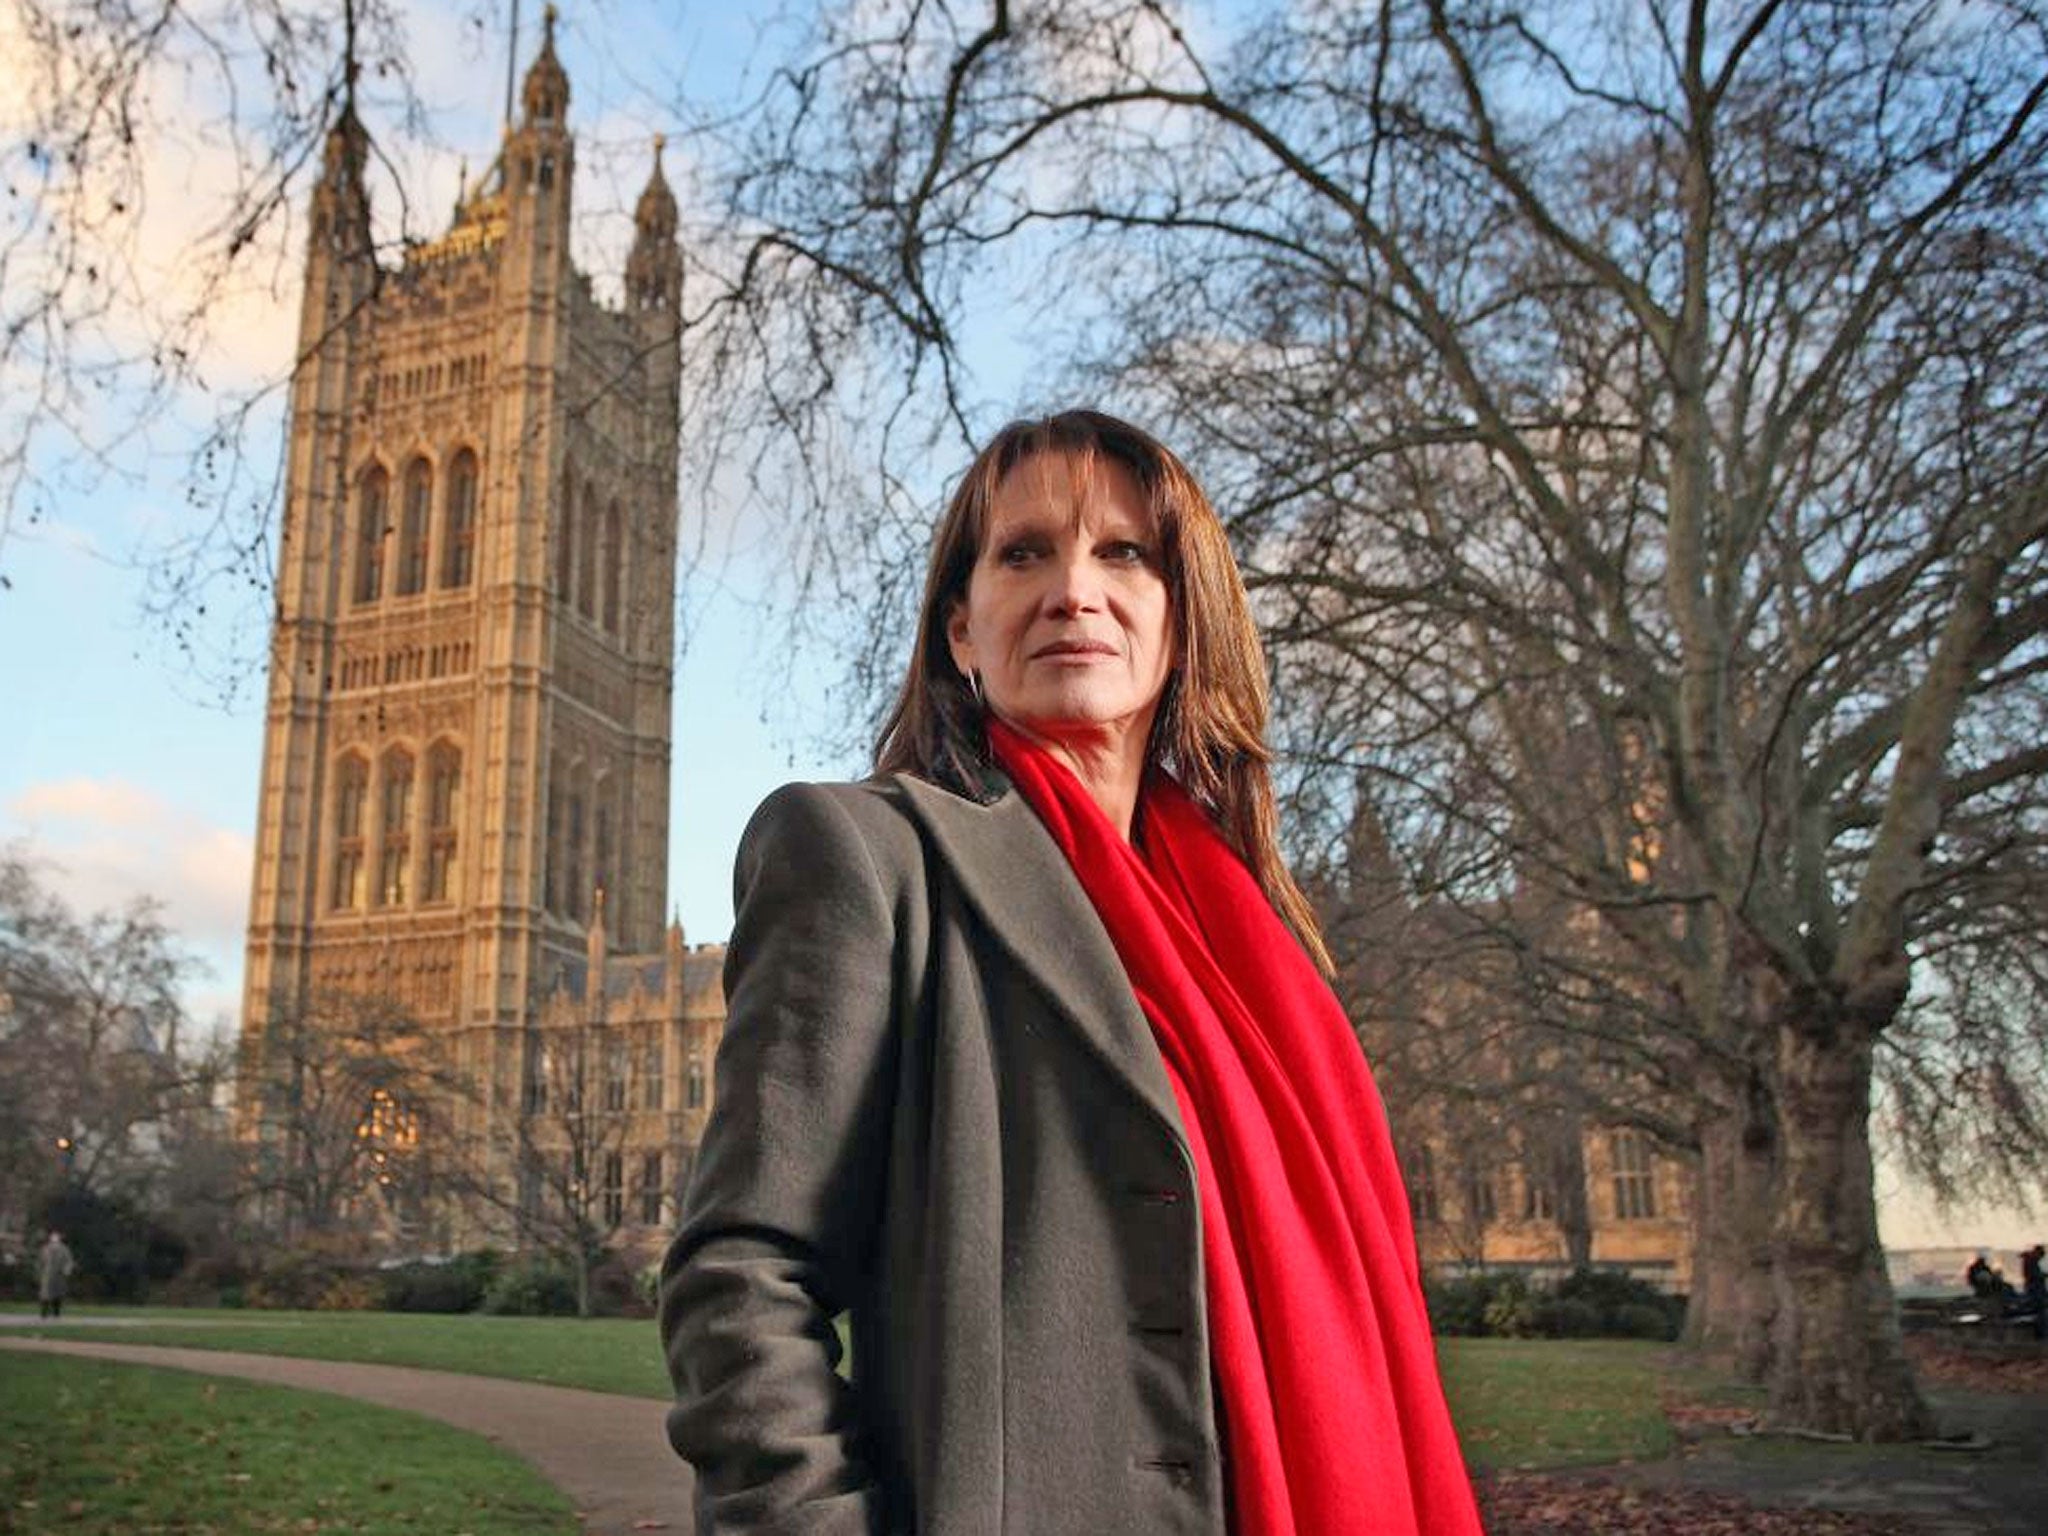 Lynne Featherstone, Liberal Democrat MP for Hornsey and Wood Green and Parliamentary Under-Secretary of State for International Development